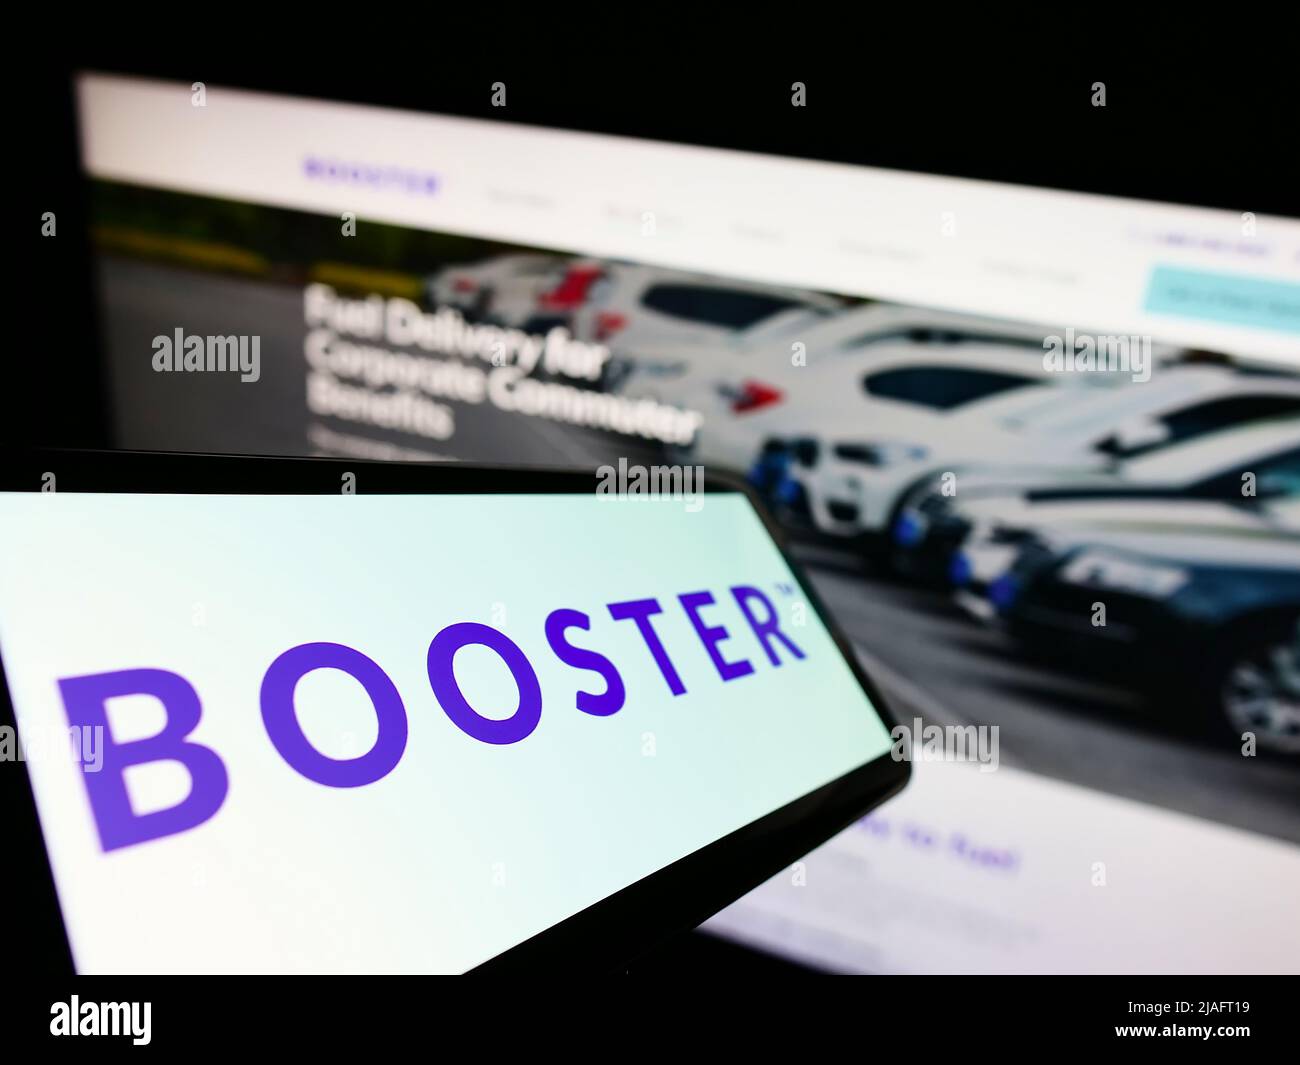 Mobile phone with logo of American energy delivery company Booster Fuels Inc. on screen in front of website. Focus on center of phone display. Stock Photo